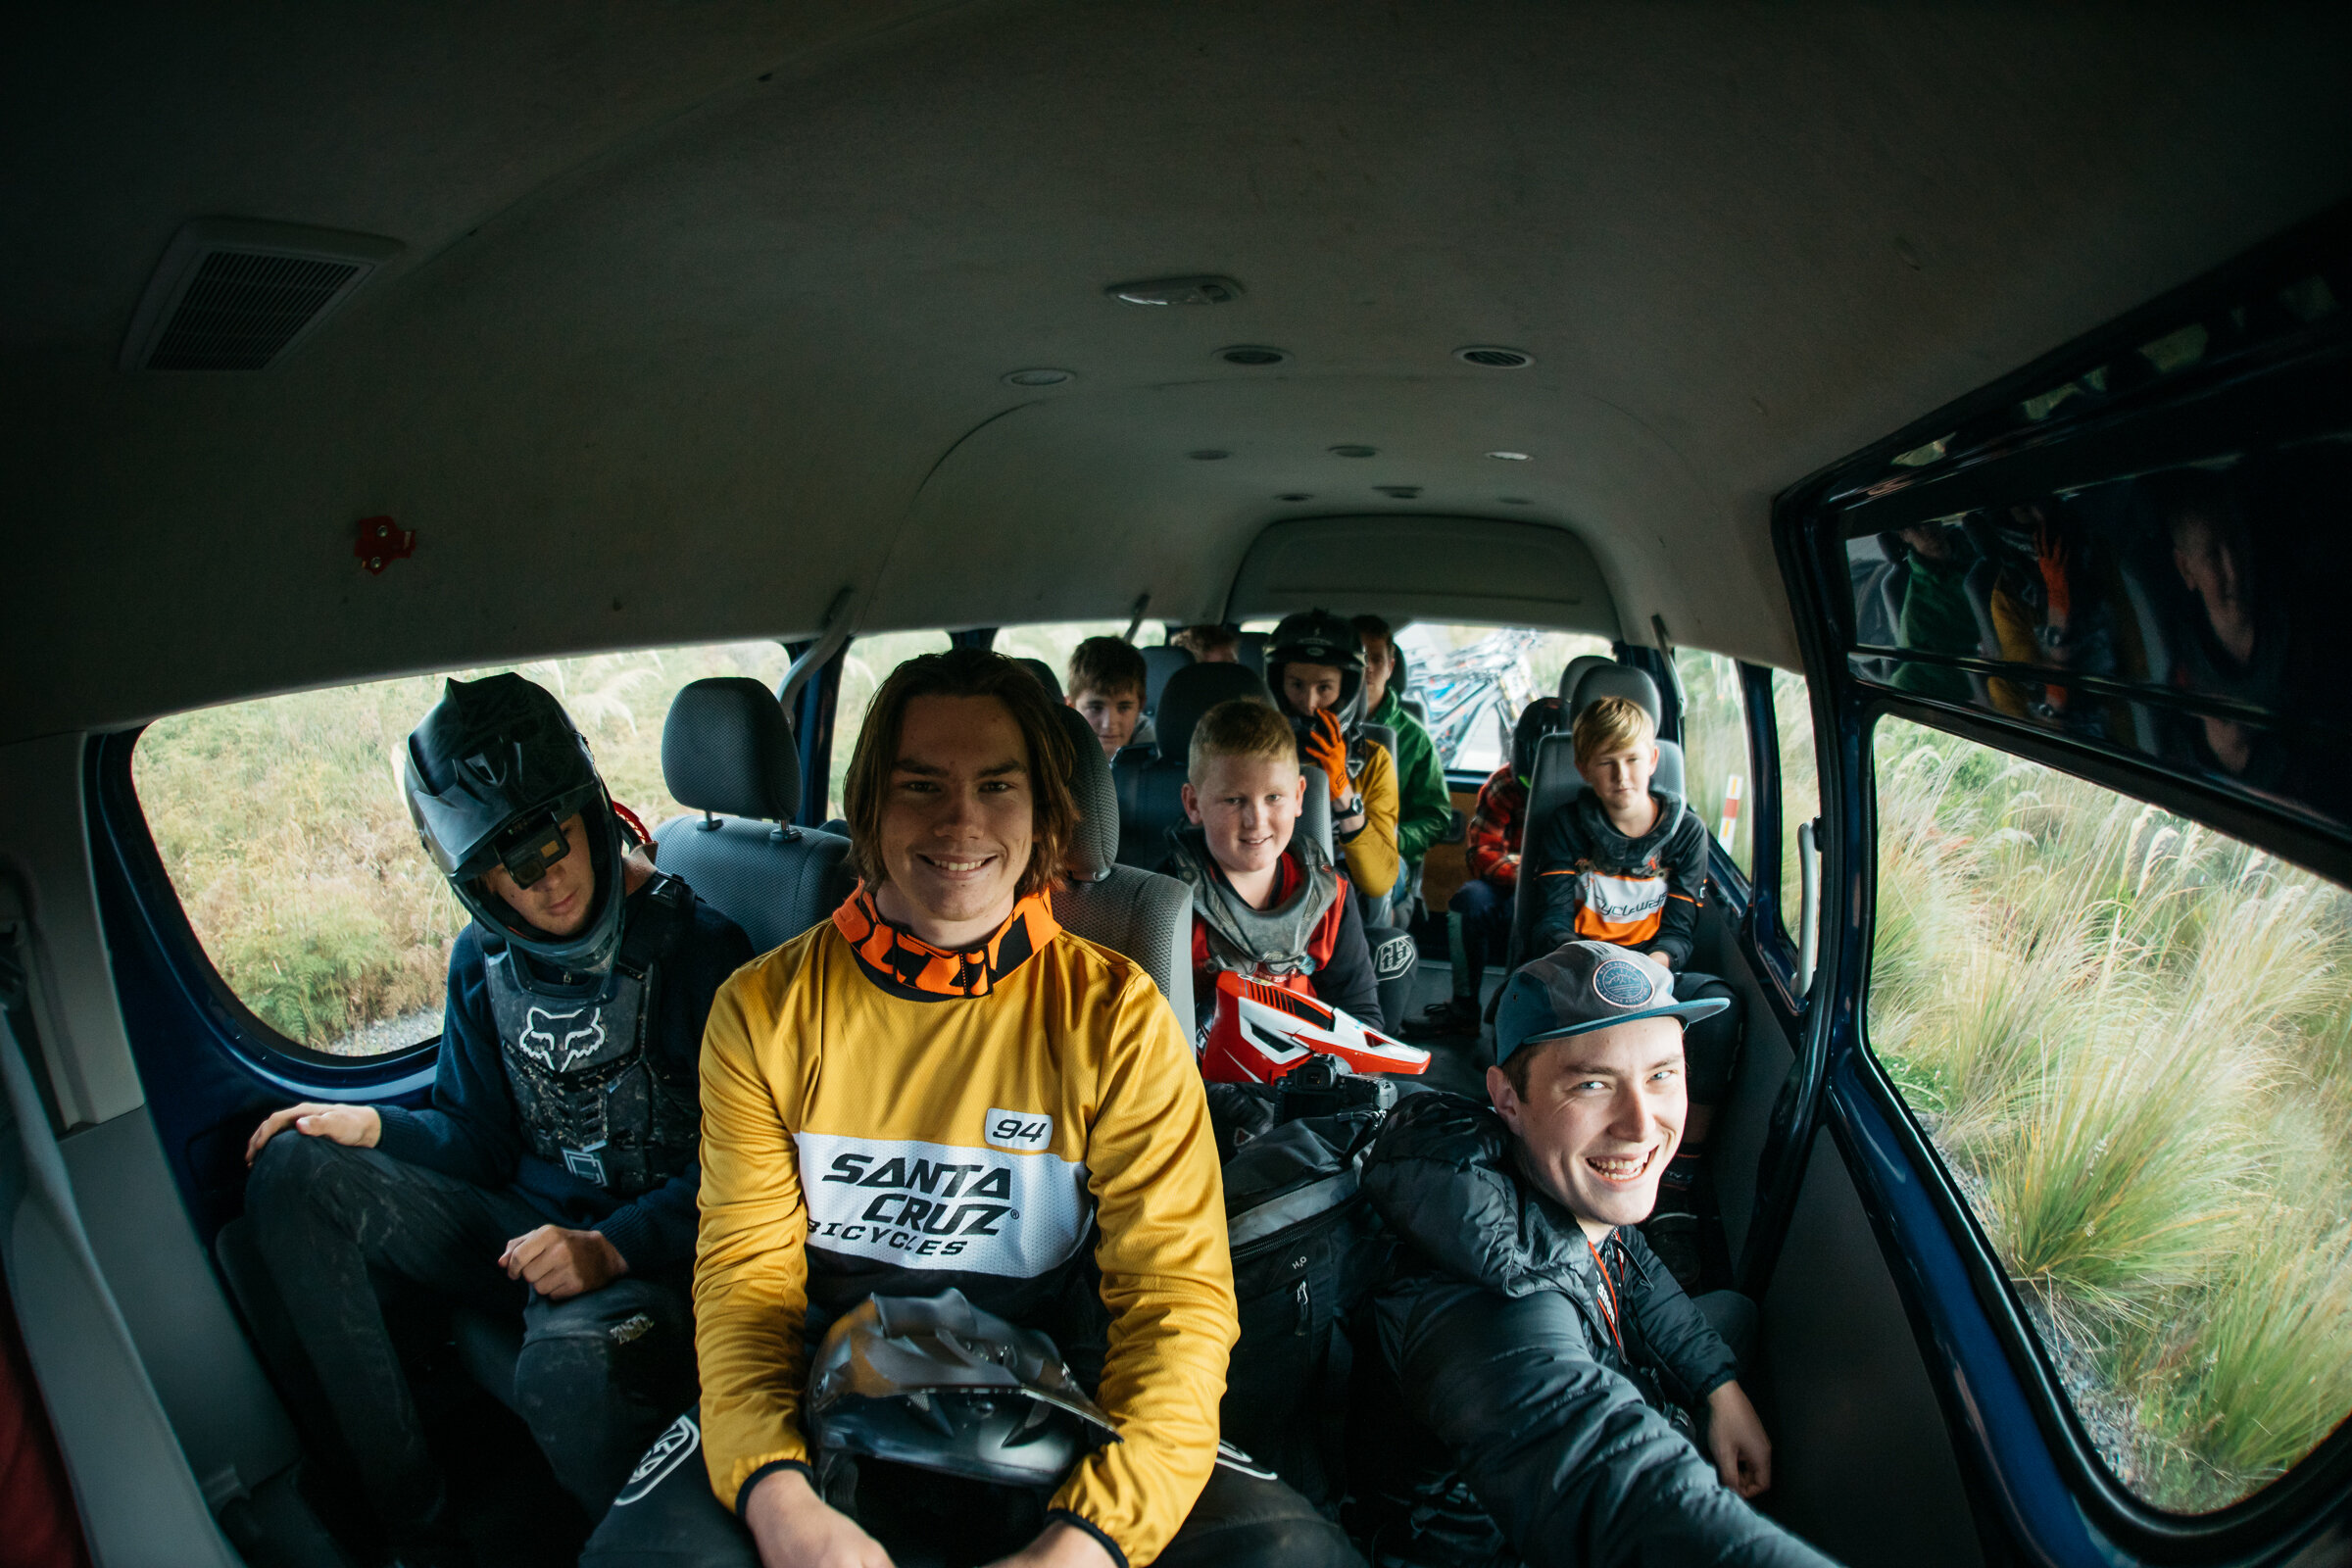 Enduro might be trendy right now but a good DH race can still fill a few mini-buses.